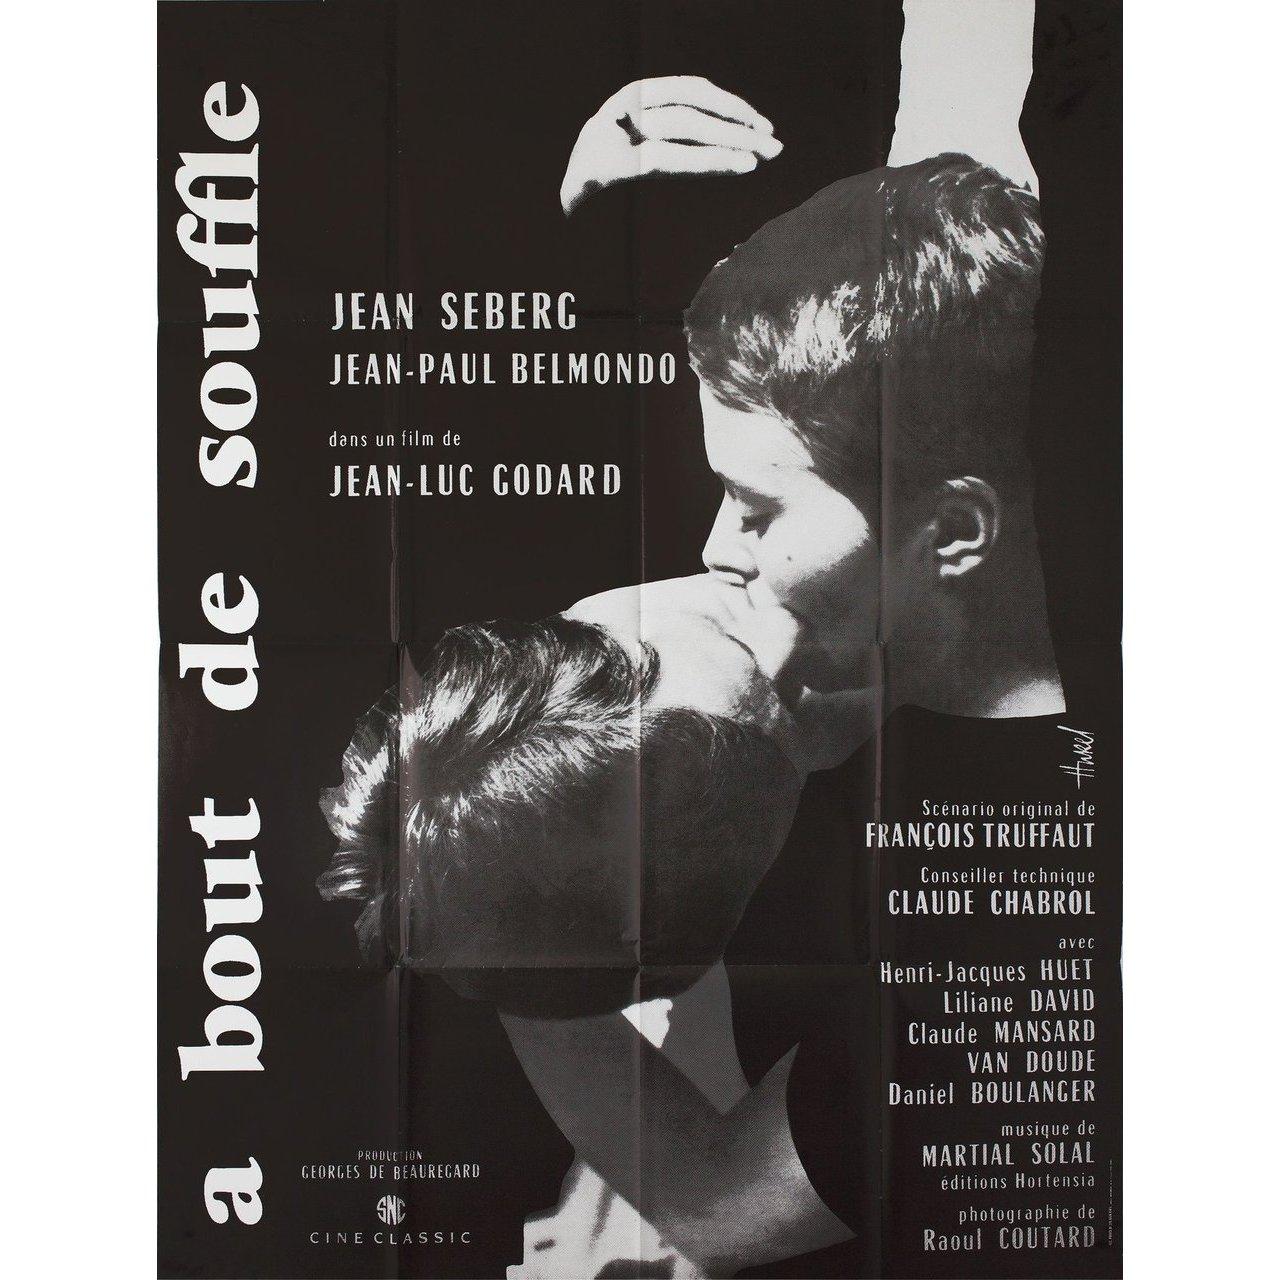 Original 1980s re-release French grande poster for the 1960 film Breathless (A bout de souffle) directed by Jean-Luc Godard with Jean Seberg / Jean-Paul Belmondo / Daniel Boulanger / Henri-Jacques Huet. Very Good-Fine condition, folded. Many